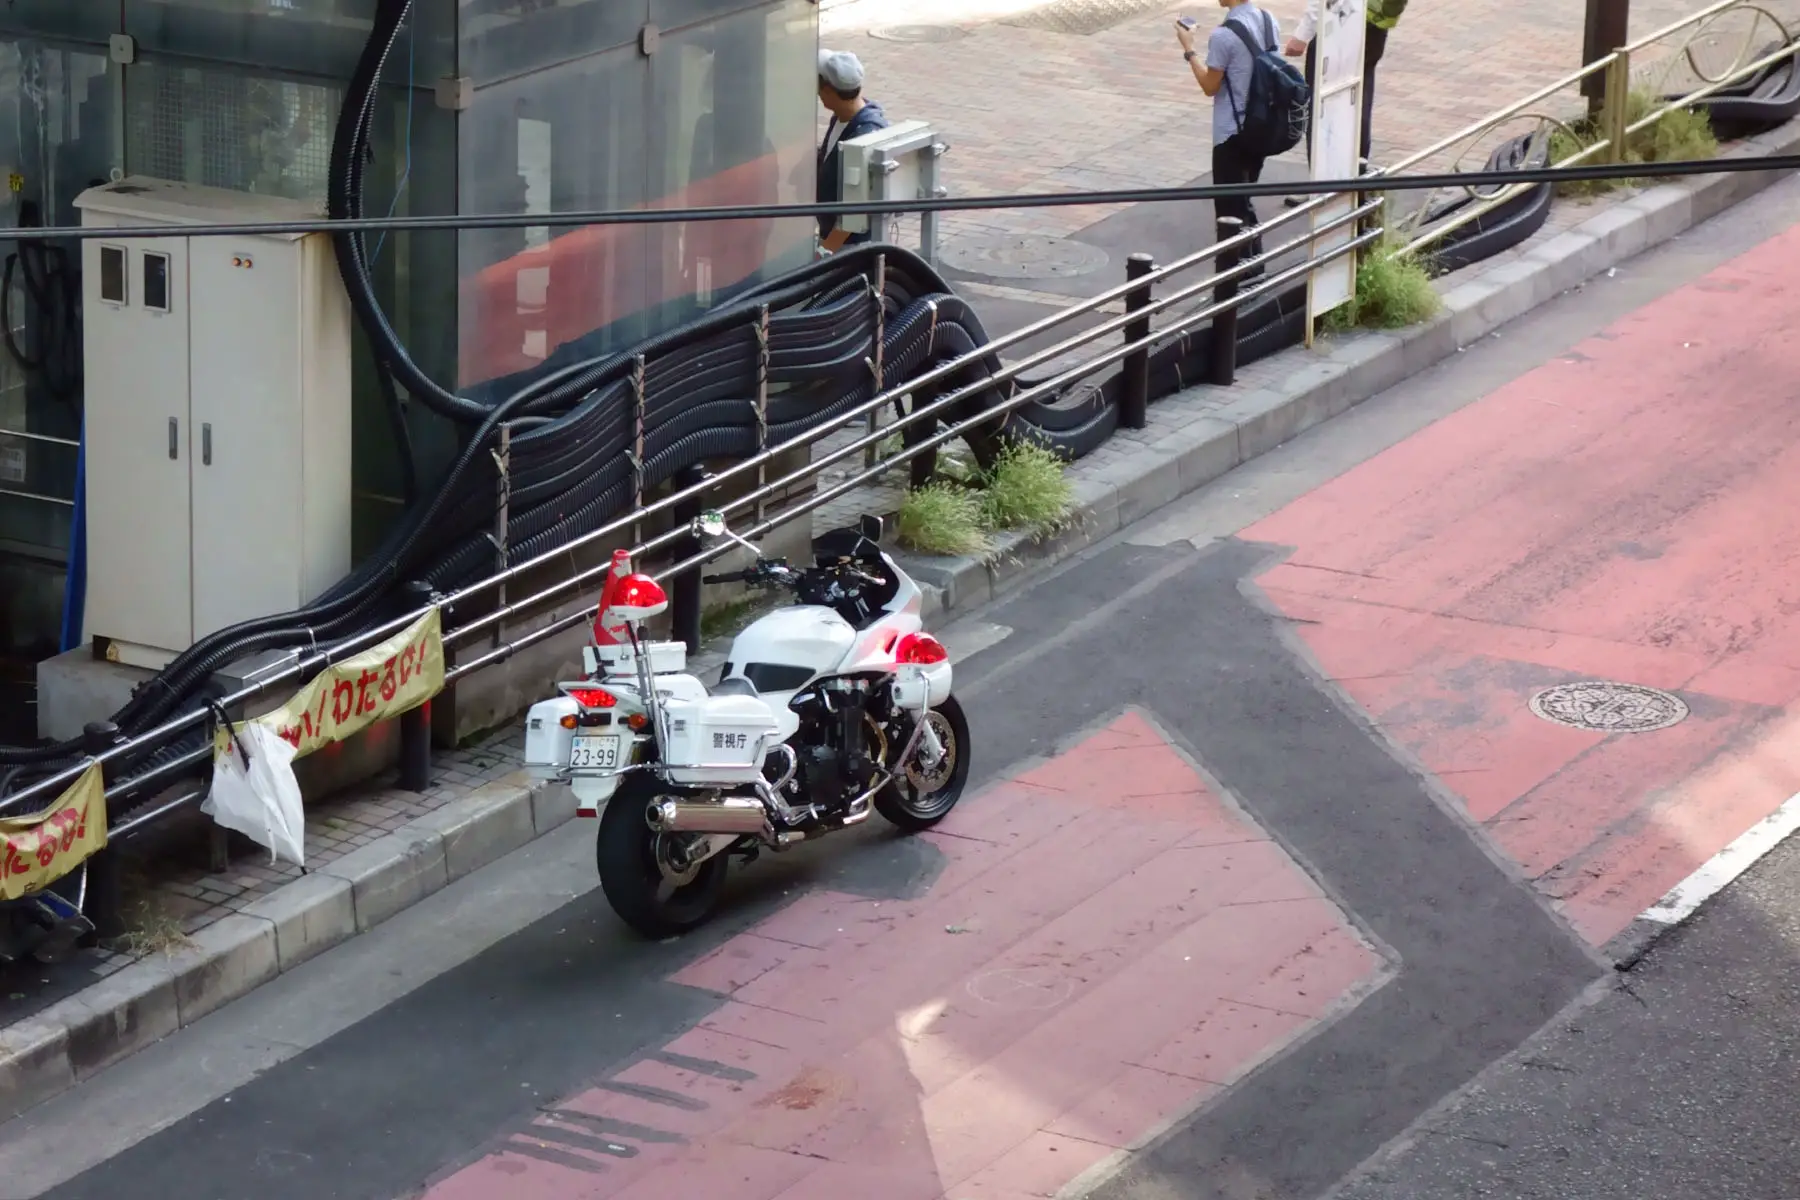 Japanese police motorcycle parked on the road.